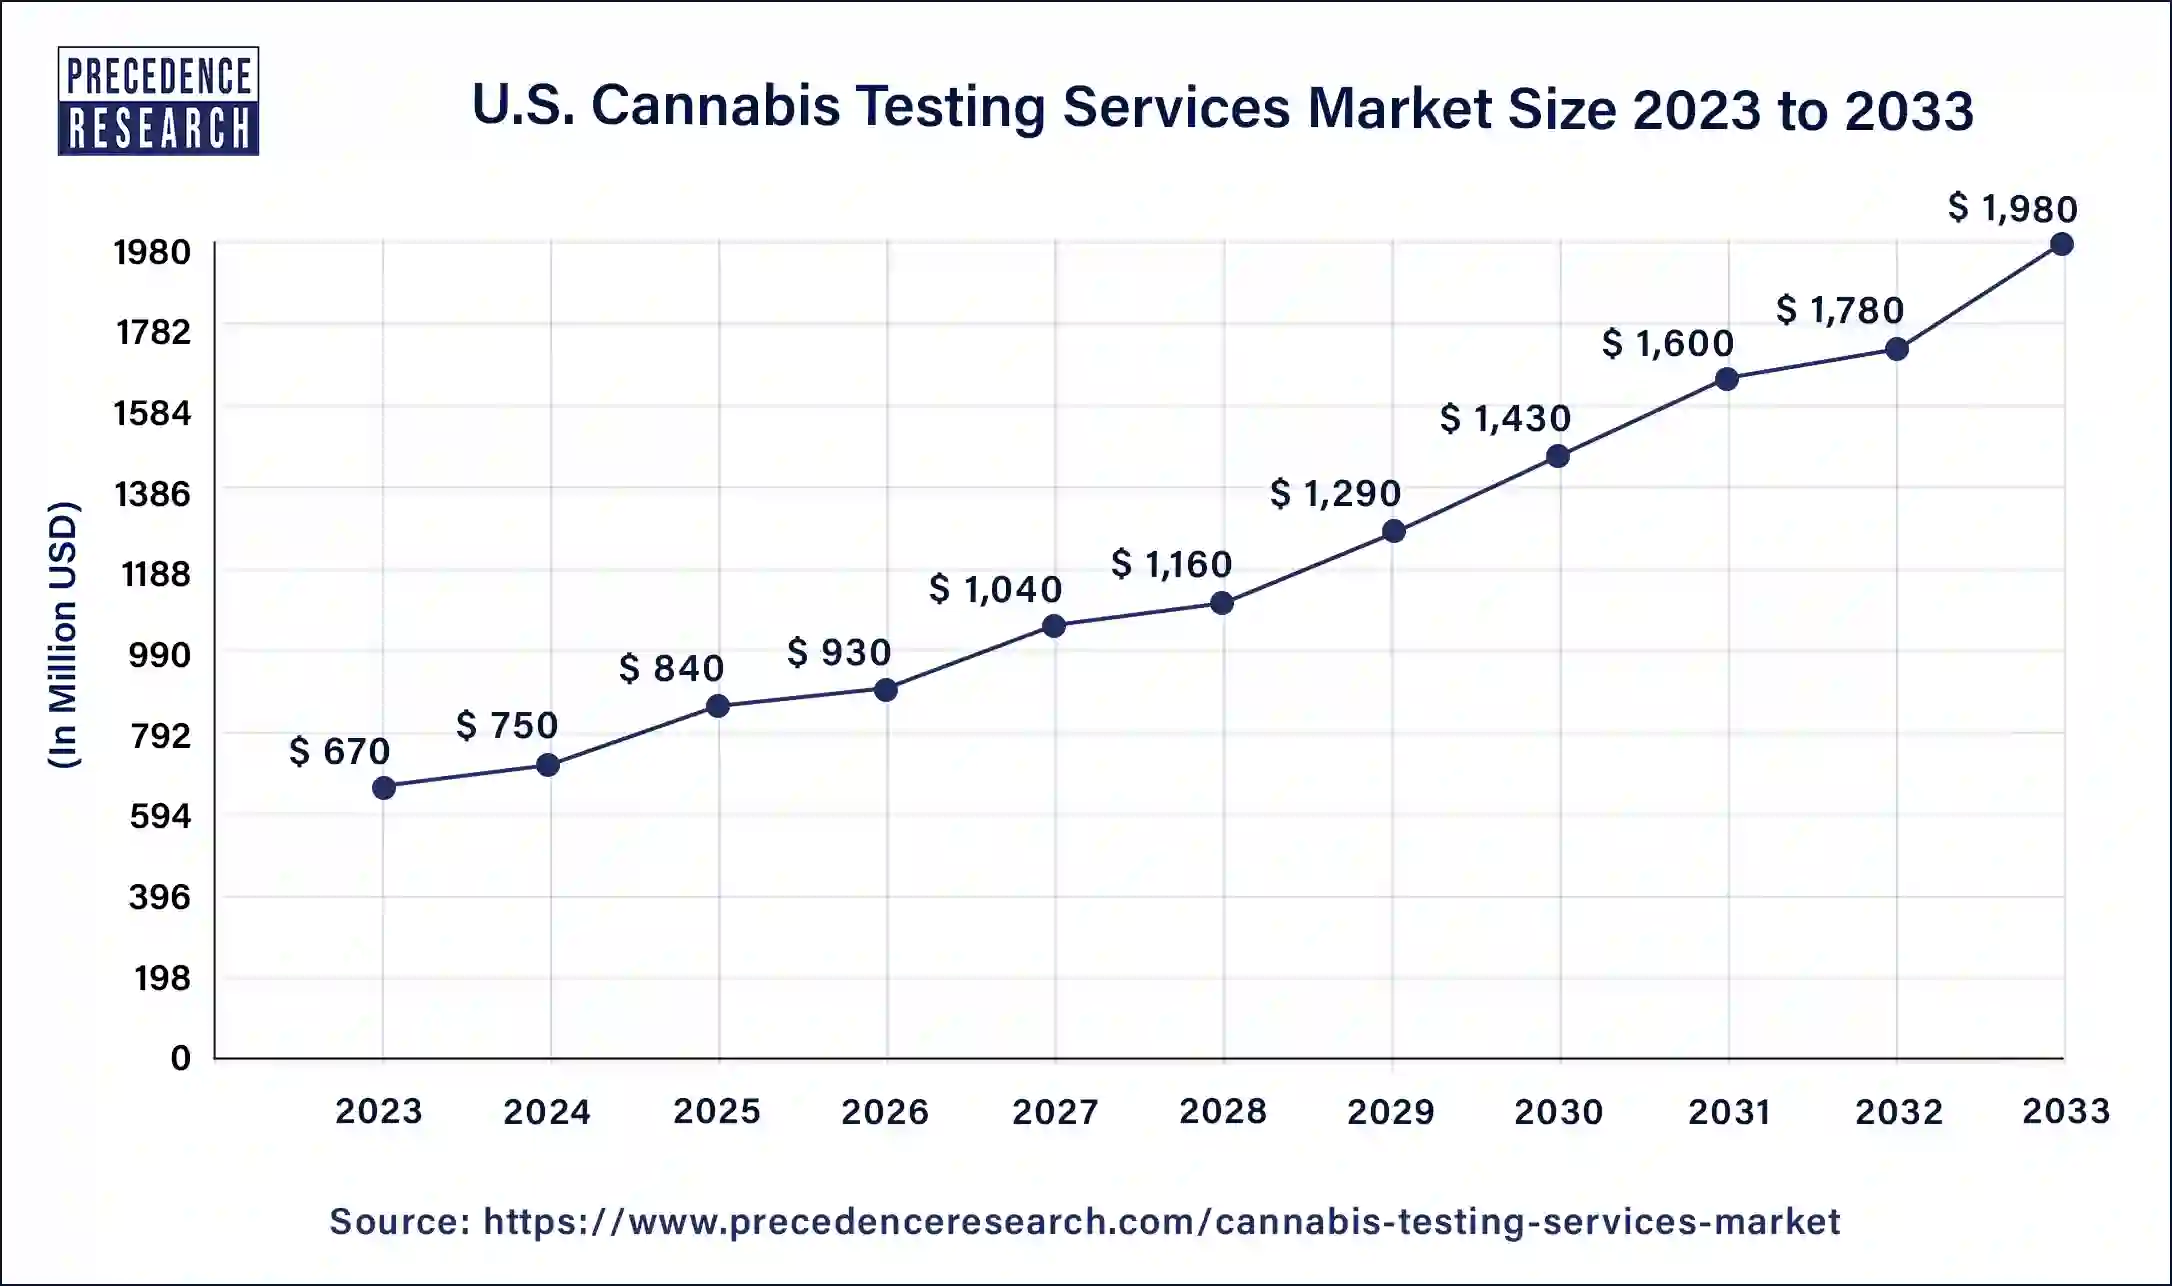 U.S. Cannabis Testing Services Market Size 2024 to 2033